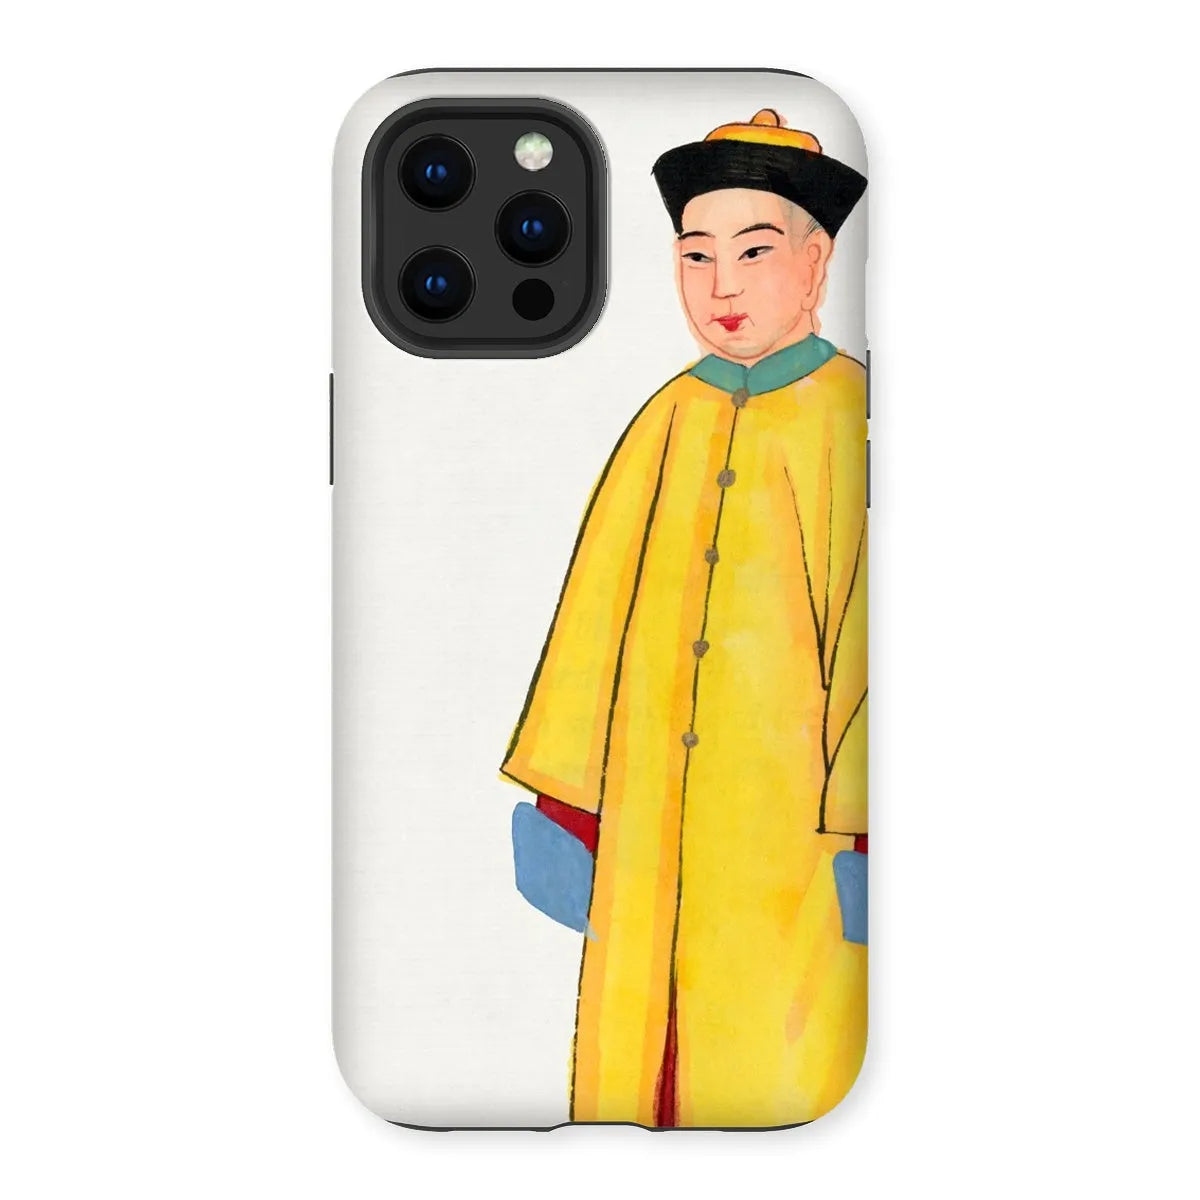 Priest In Yellow Robes - Chinese Aesthetic Art Phone Case - Iphone 12 Pro Max / Matte - Mobile Phone Cases - Aesthetic